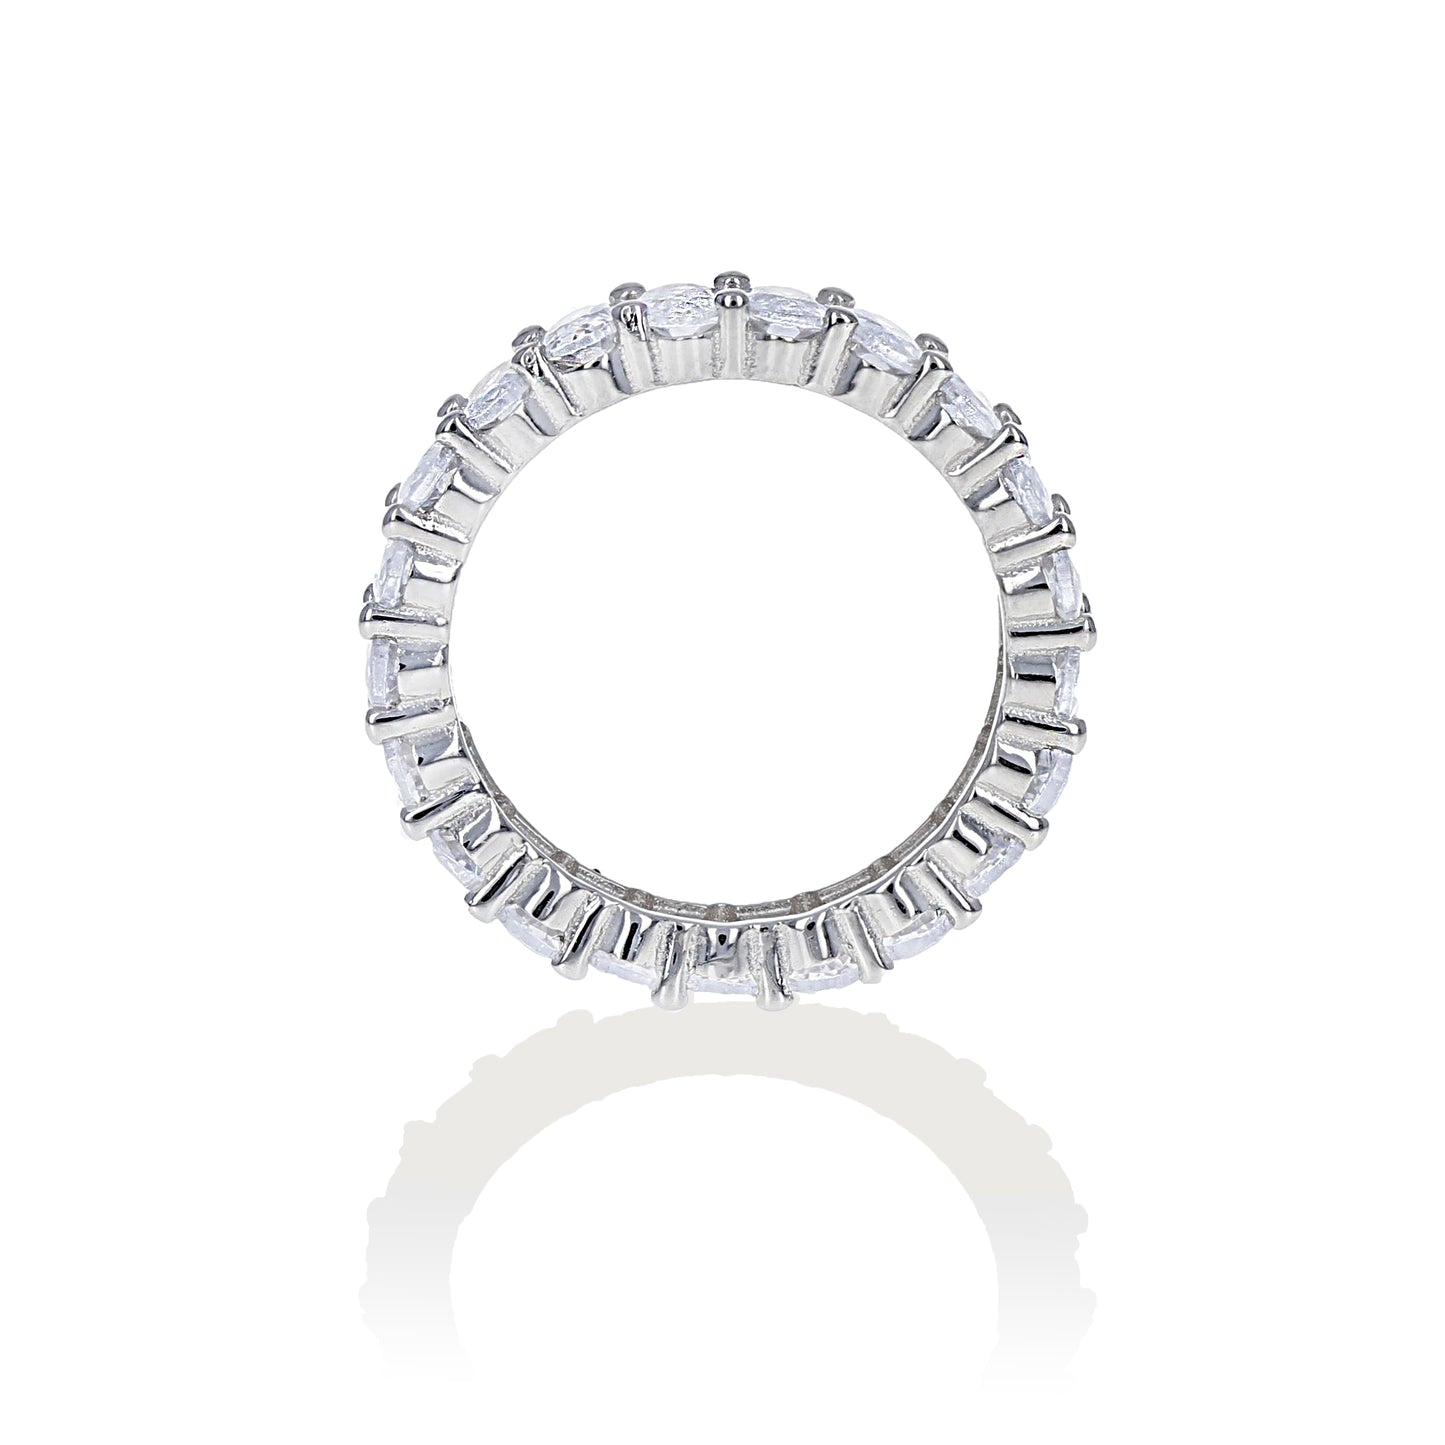 View of the prong setting for the oval shaped cubic zirconia eternity band, 5mm stones - Alexandra marks 